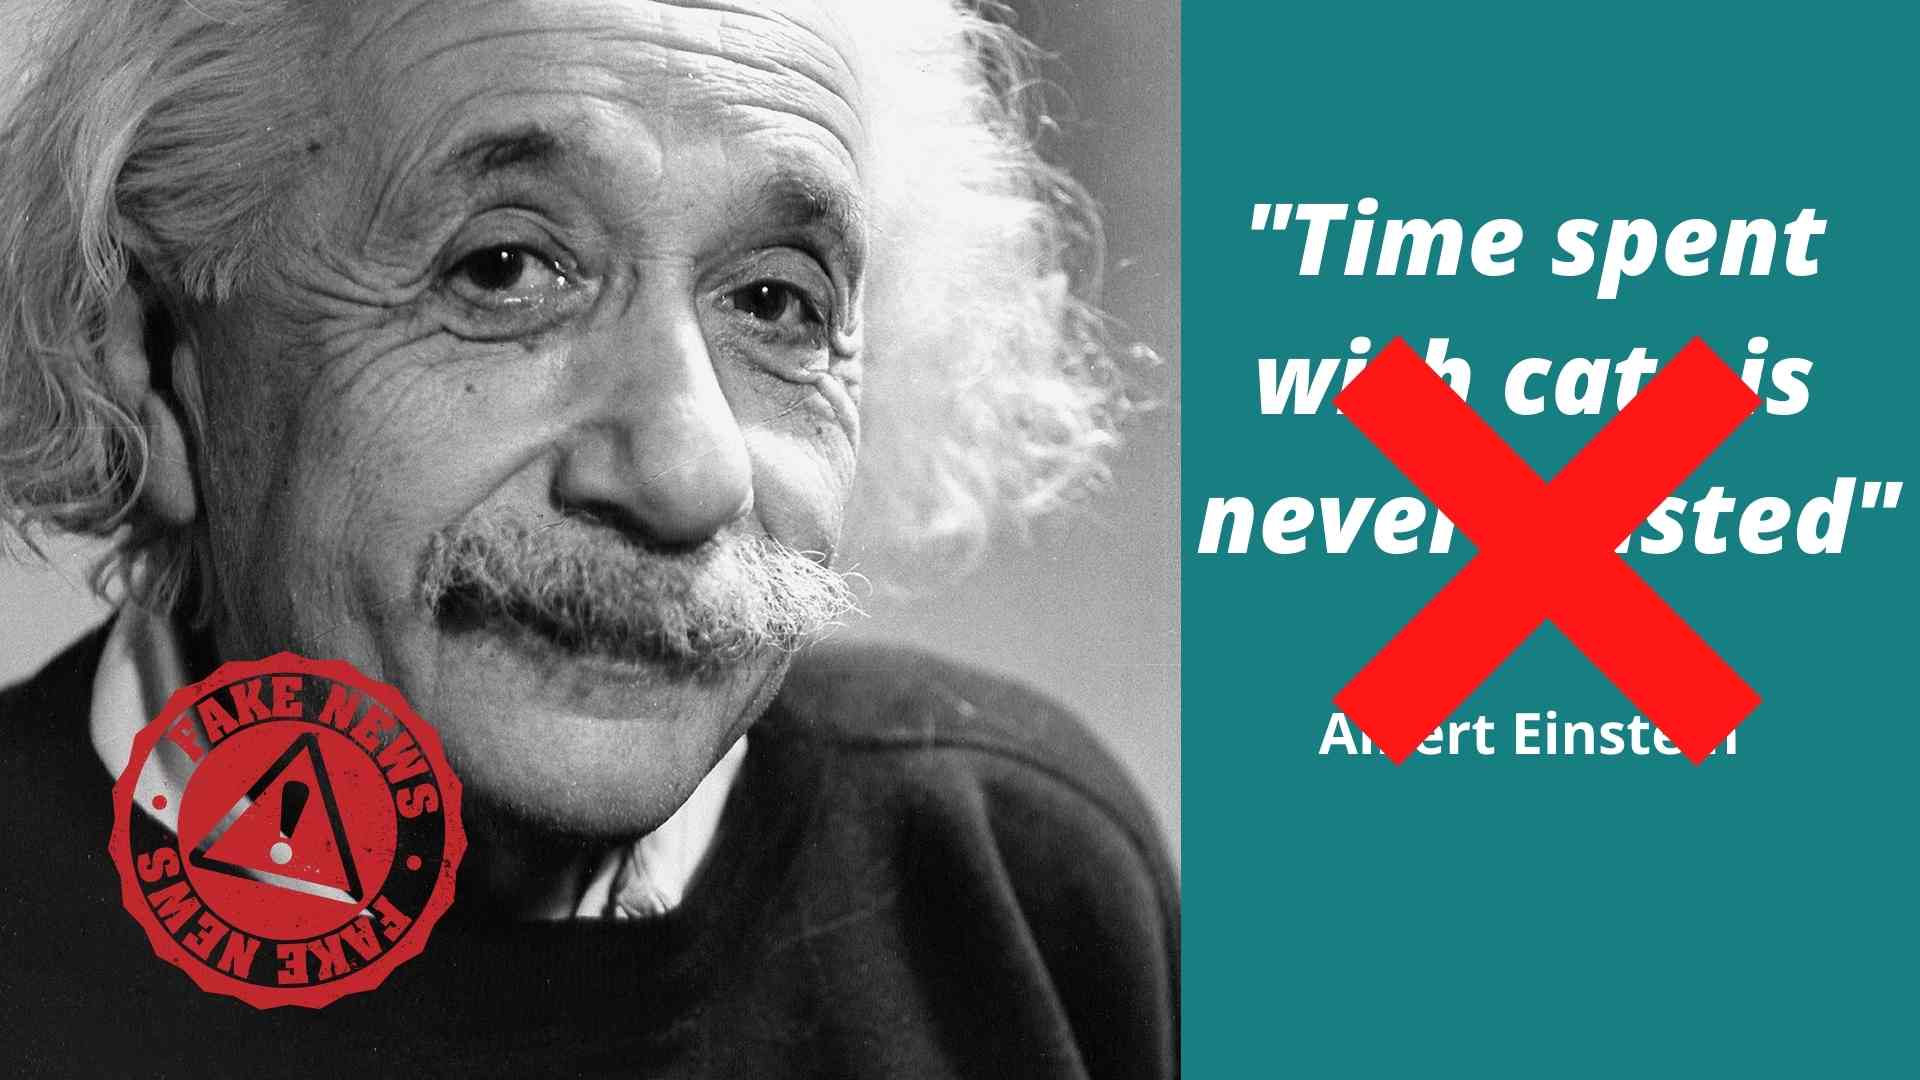 albert einstein and a fake famous quote